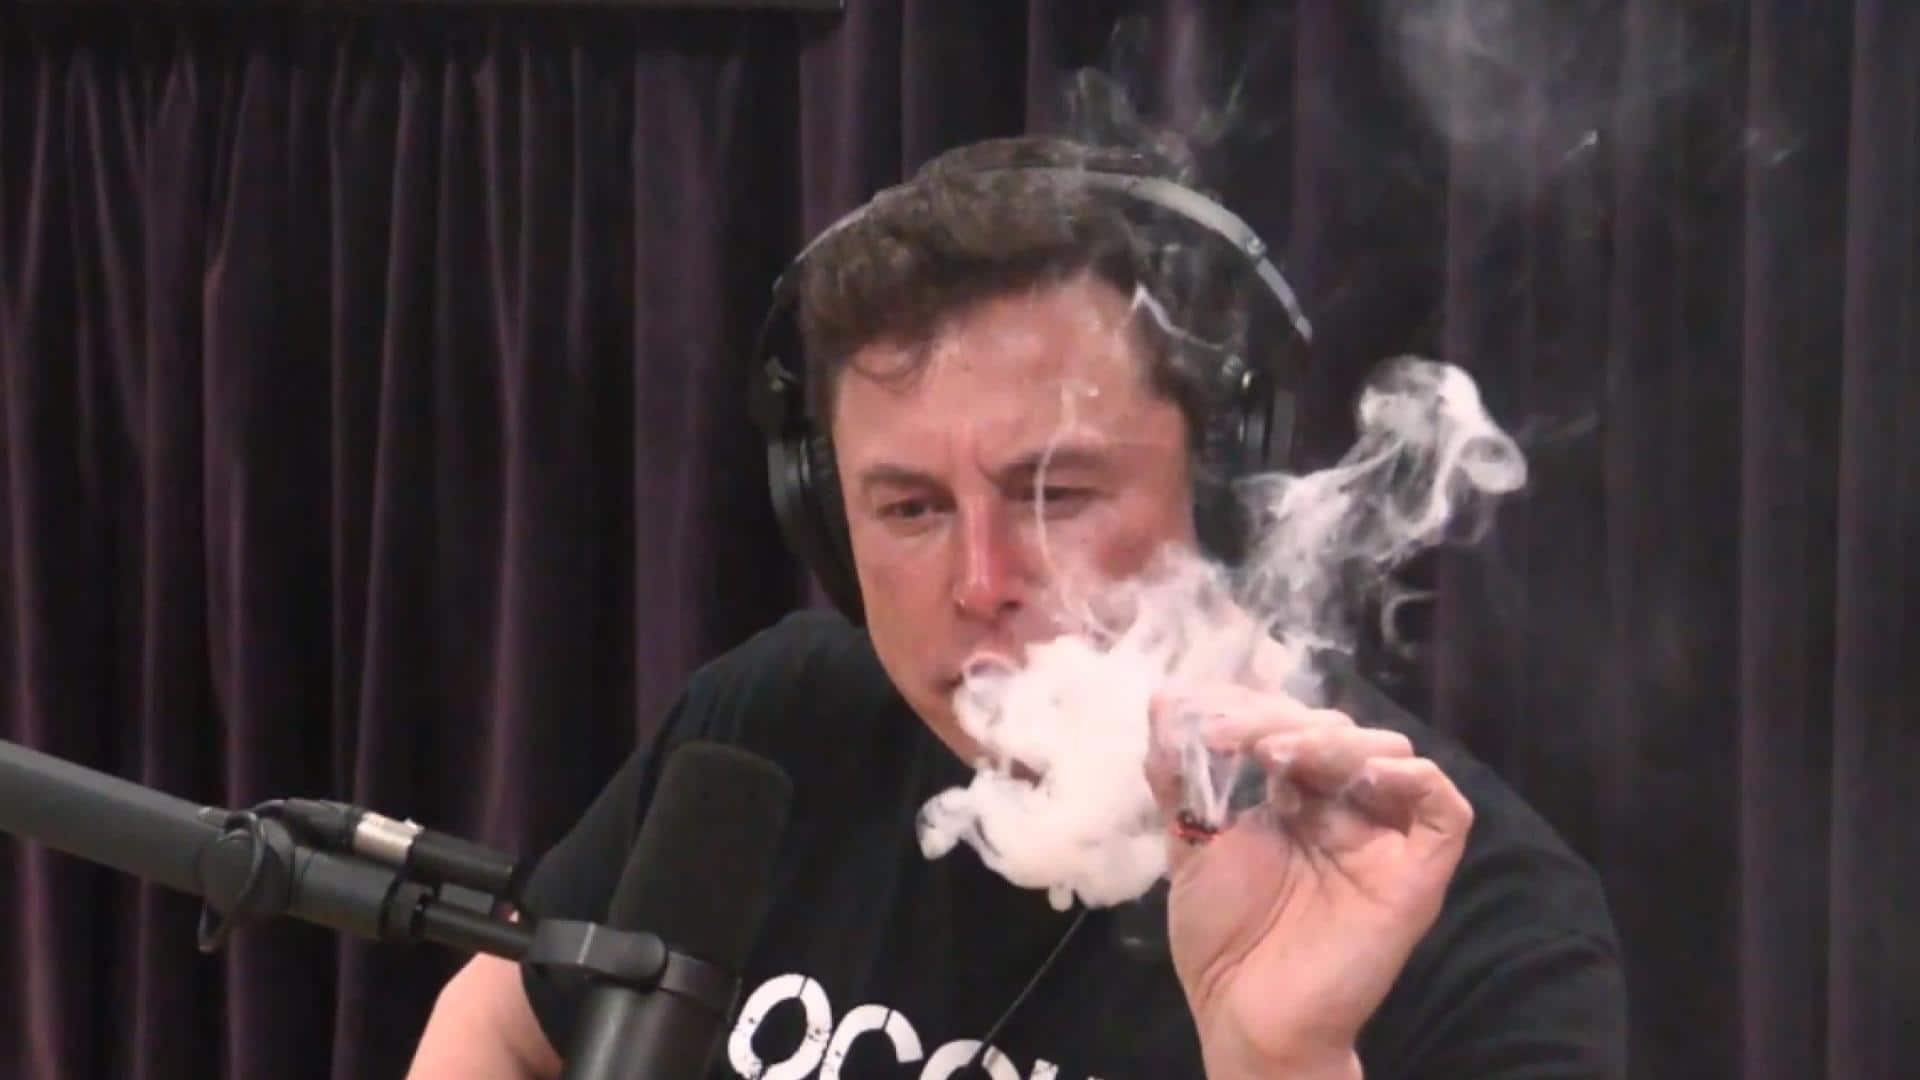 'Not even trace quantities': Elon Musk denies drug use allegations